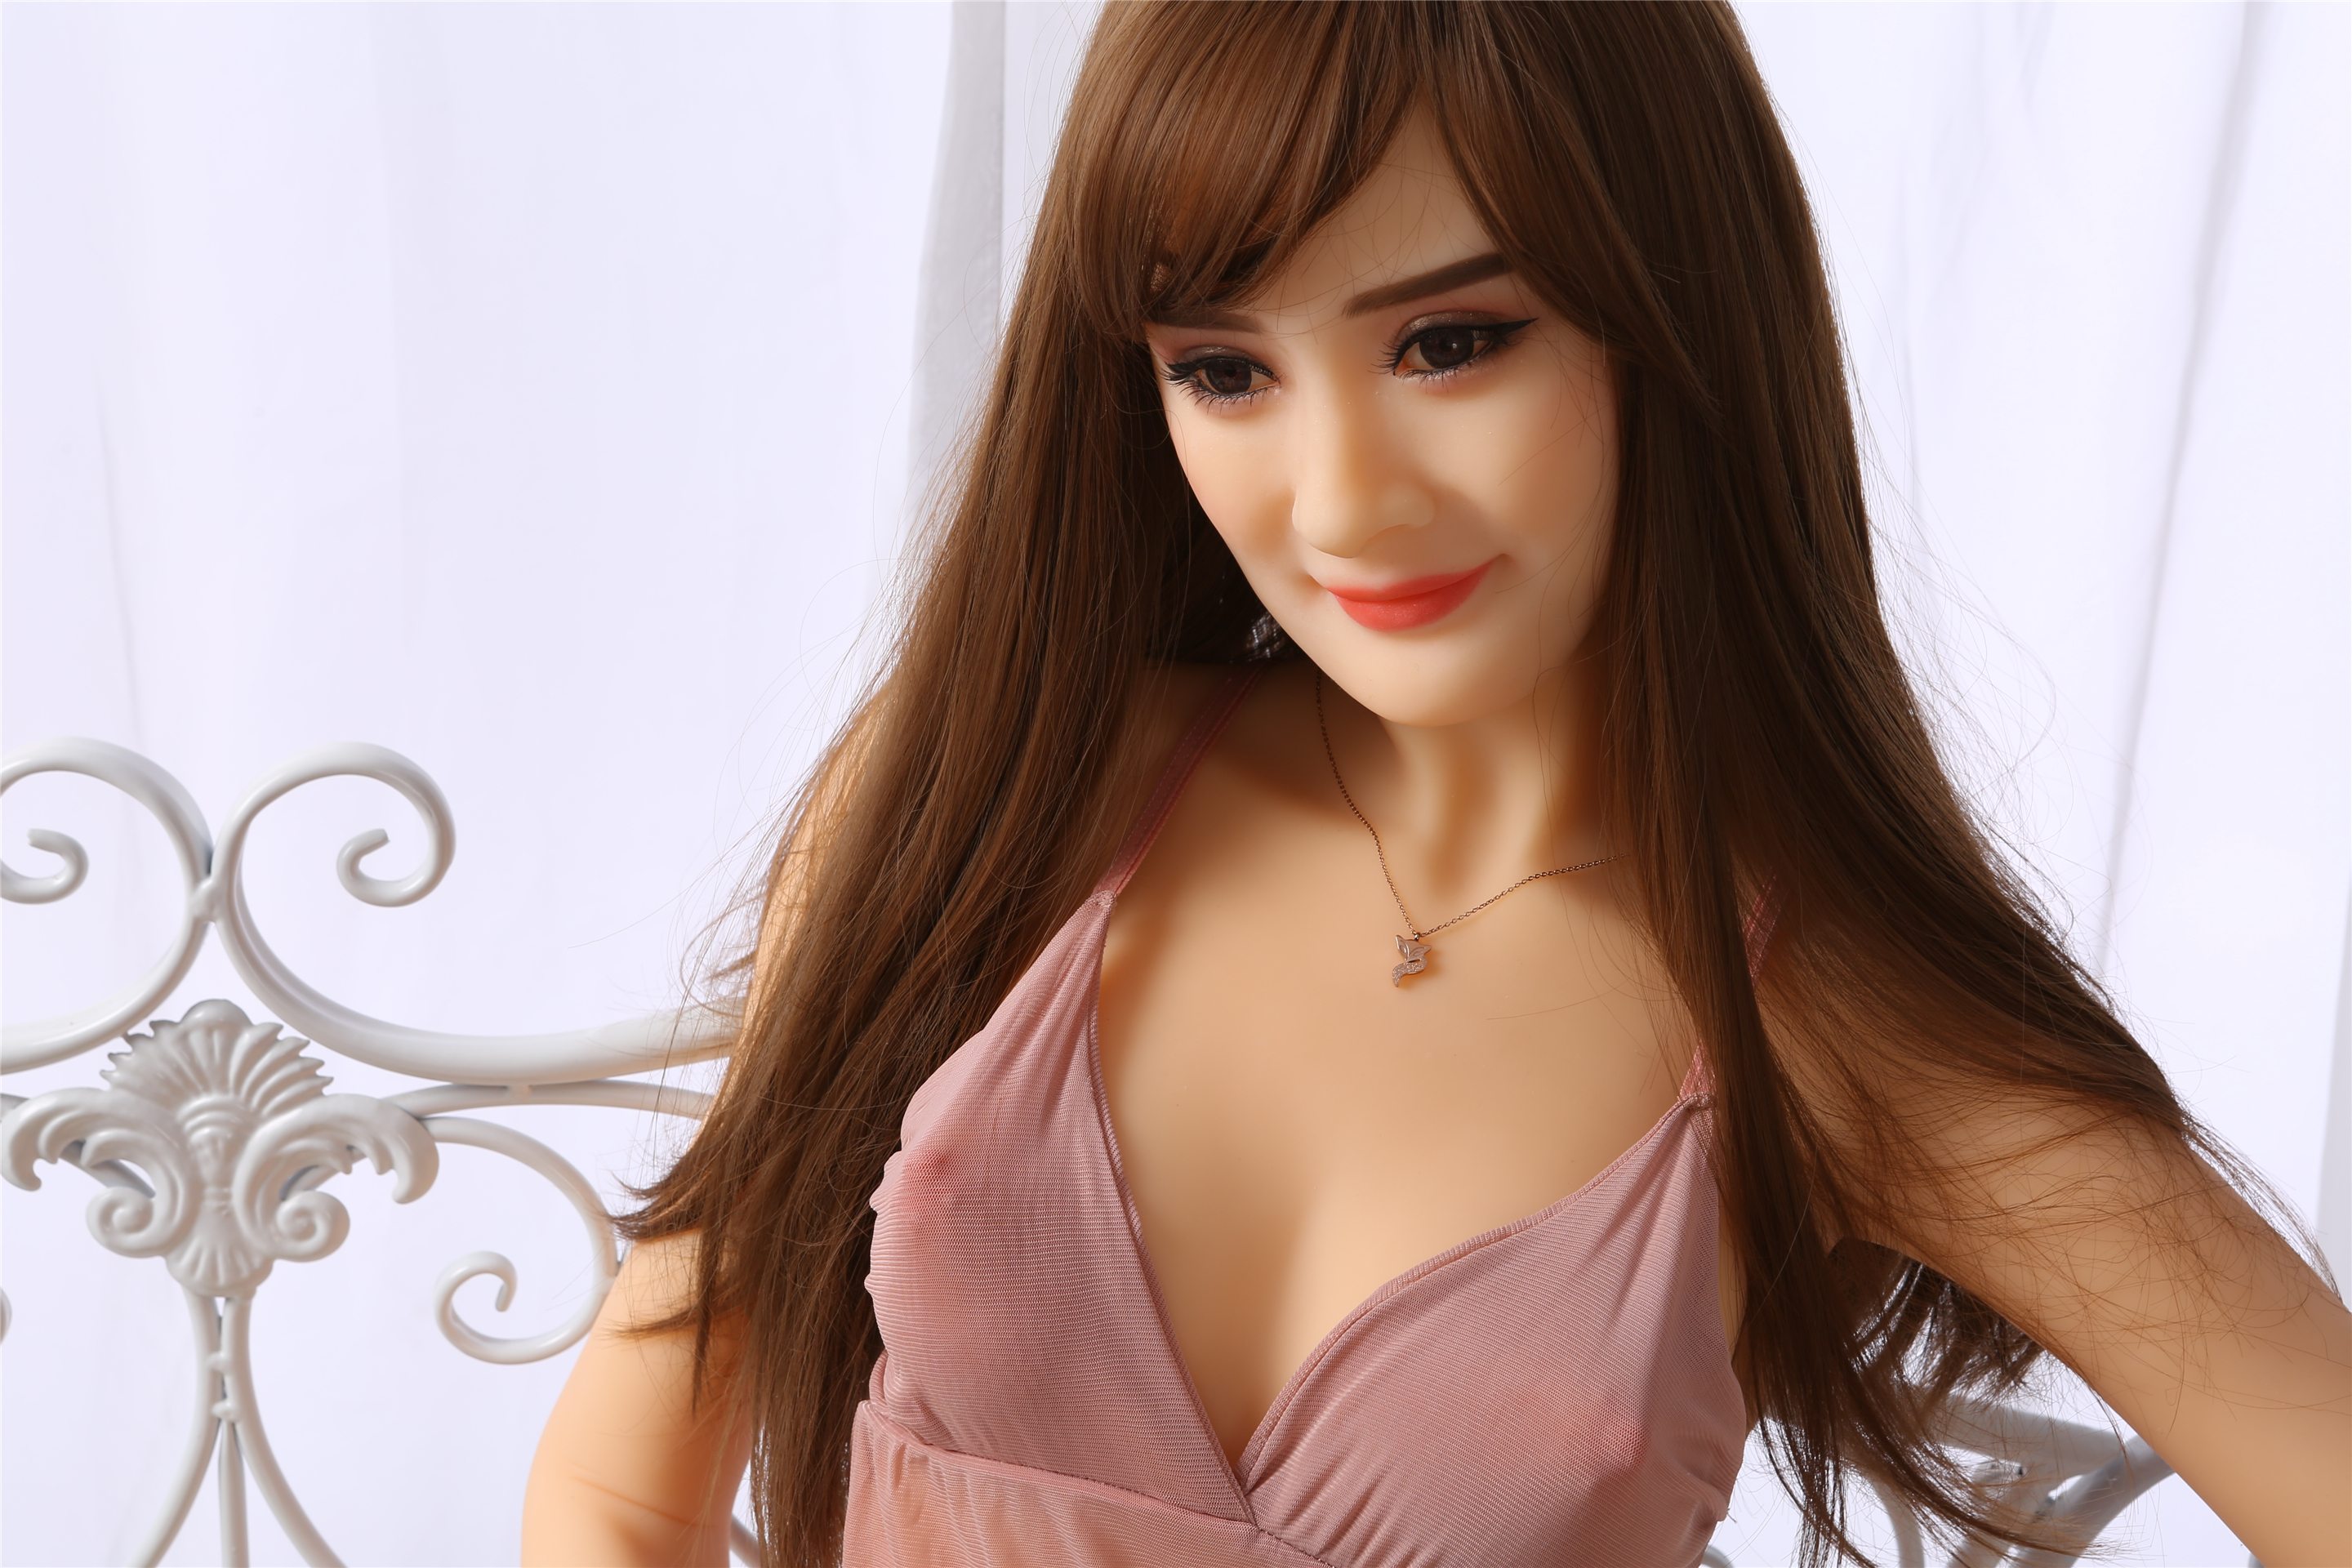 Young And Cute Small Cup Silicone Sex Doll Market Price Small Cup Silicone Sex Doll 2